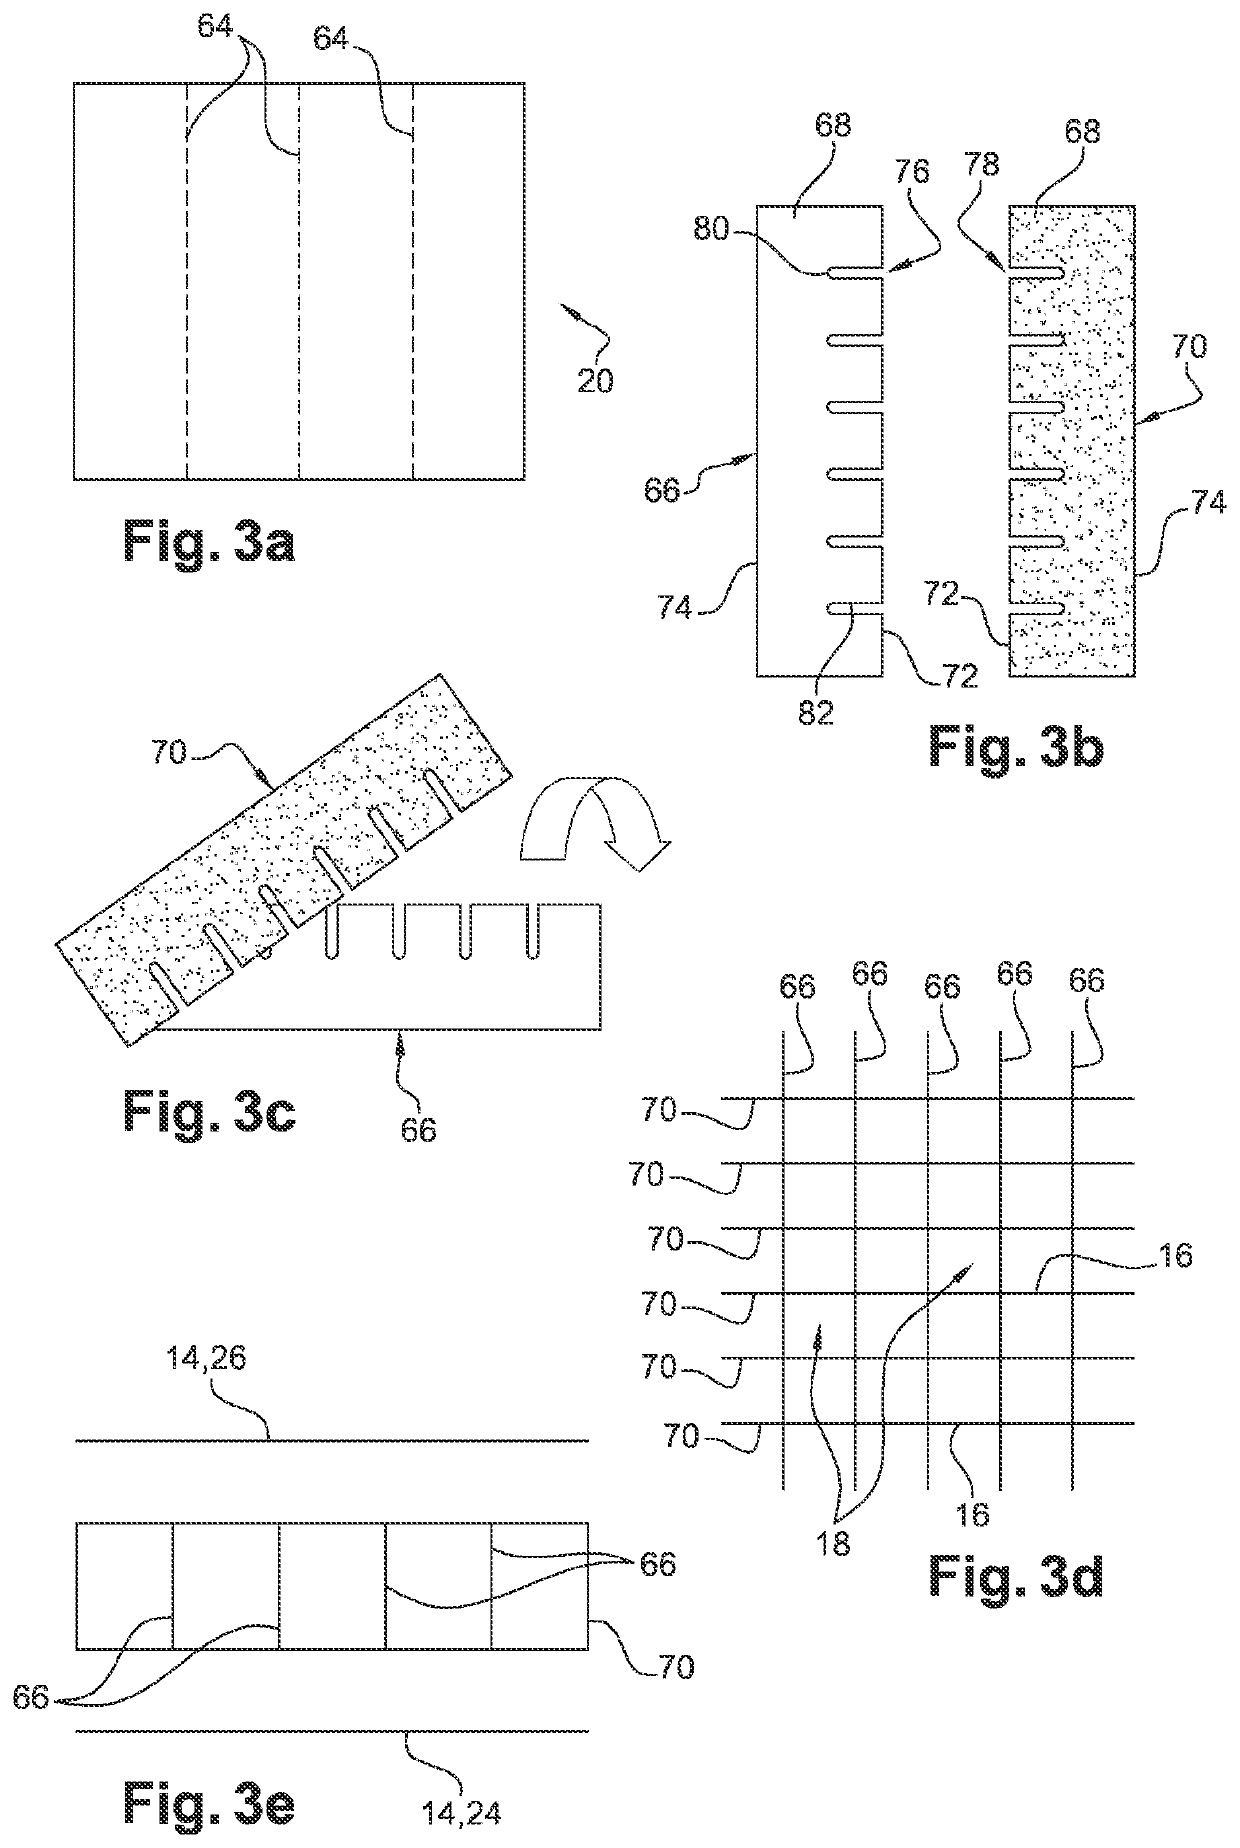 Method for manufacturing an acoustic panel